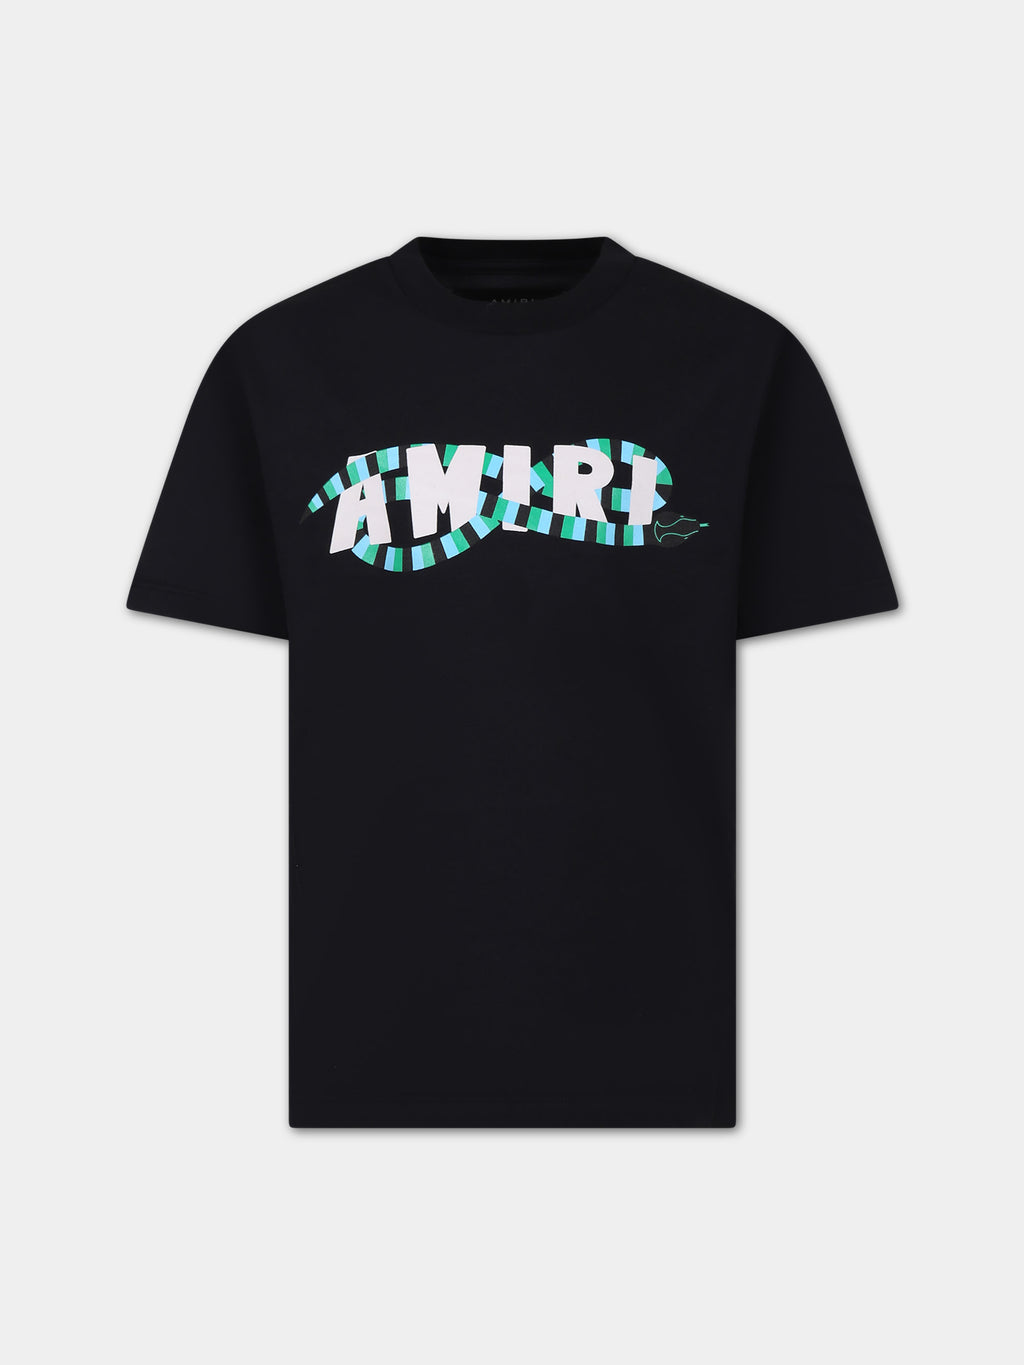 Black t-shirt for kids with snake and logo